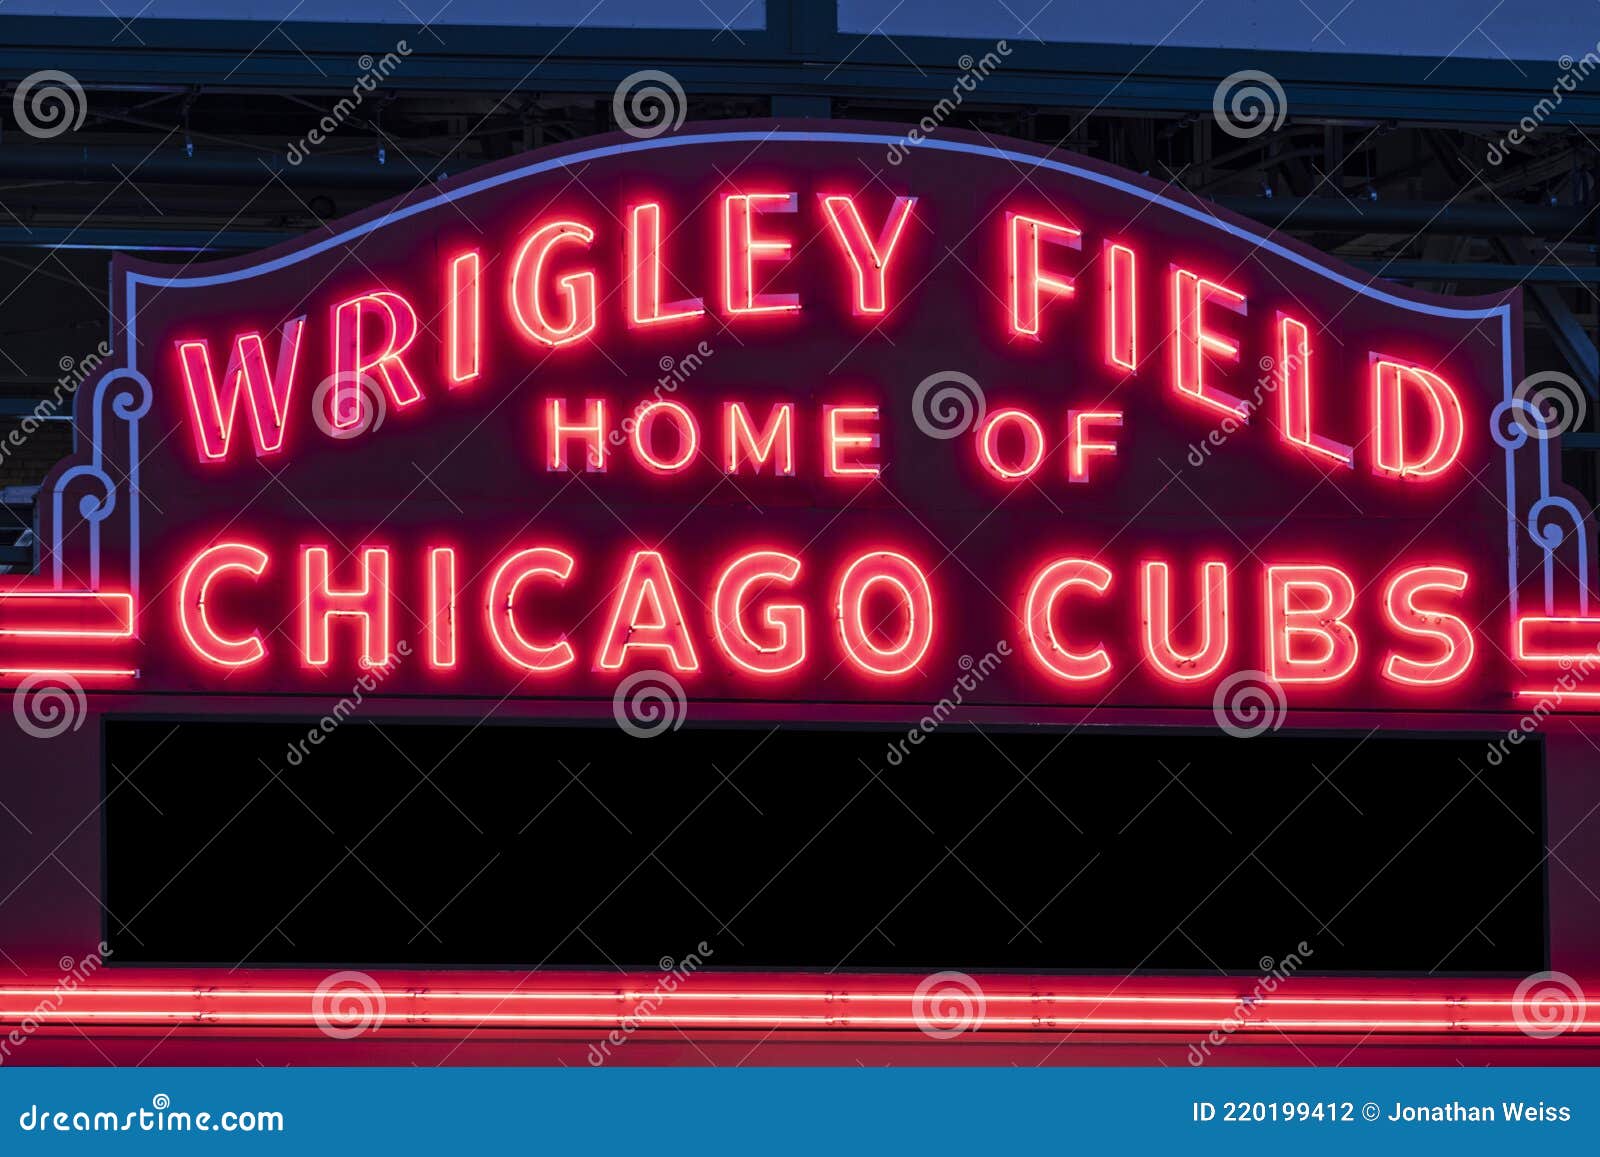 Wrigley Field Home of Chicago Cubs in Red Neon Lights with Copy